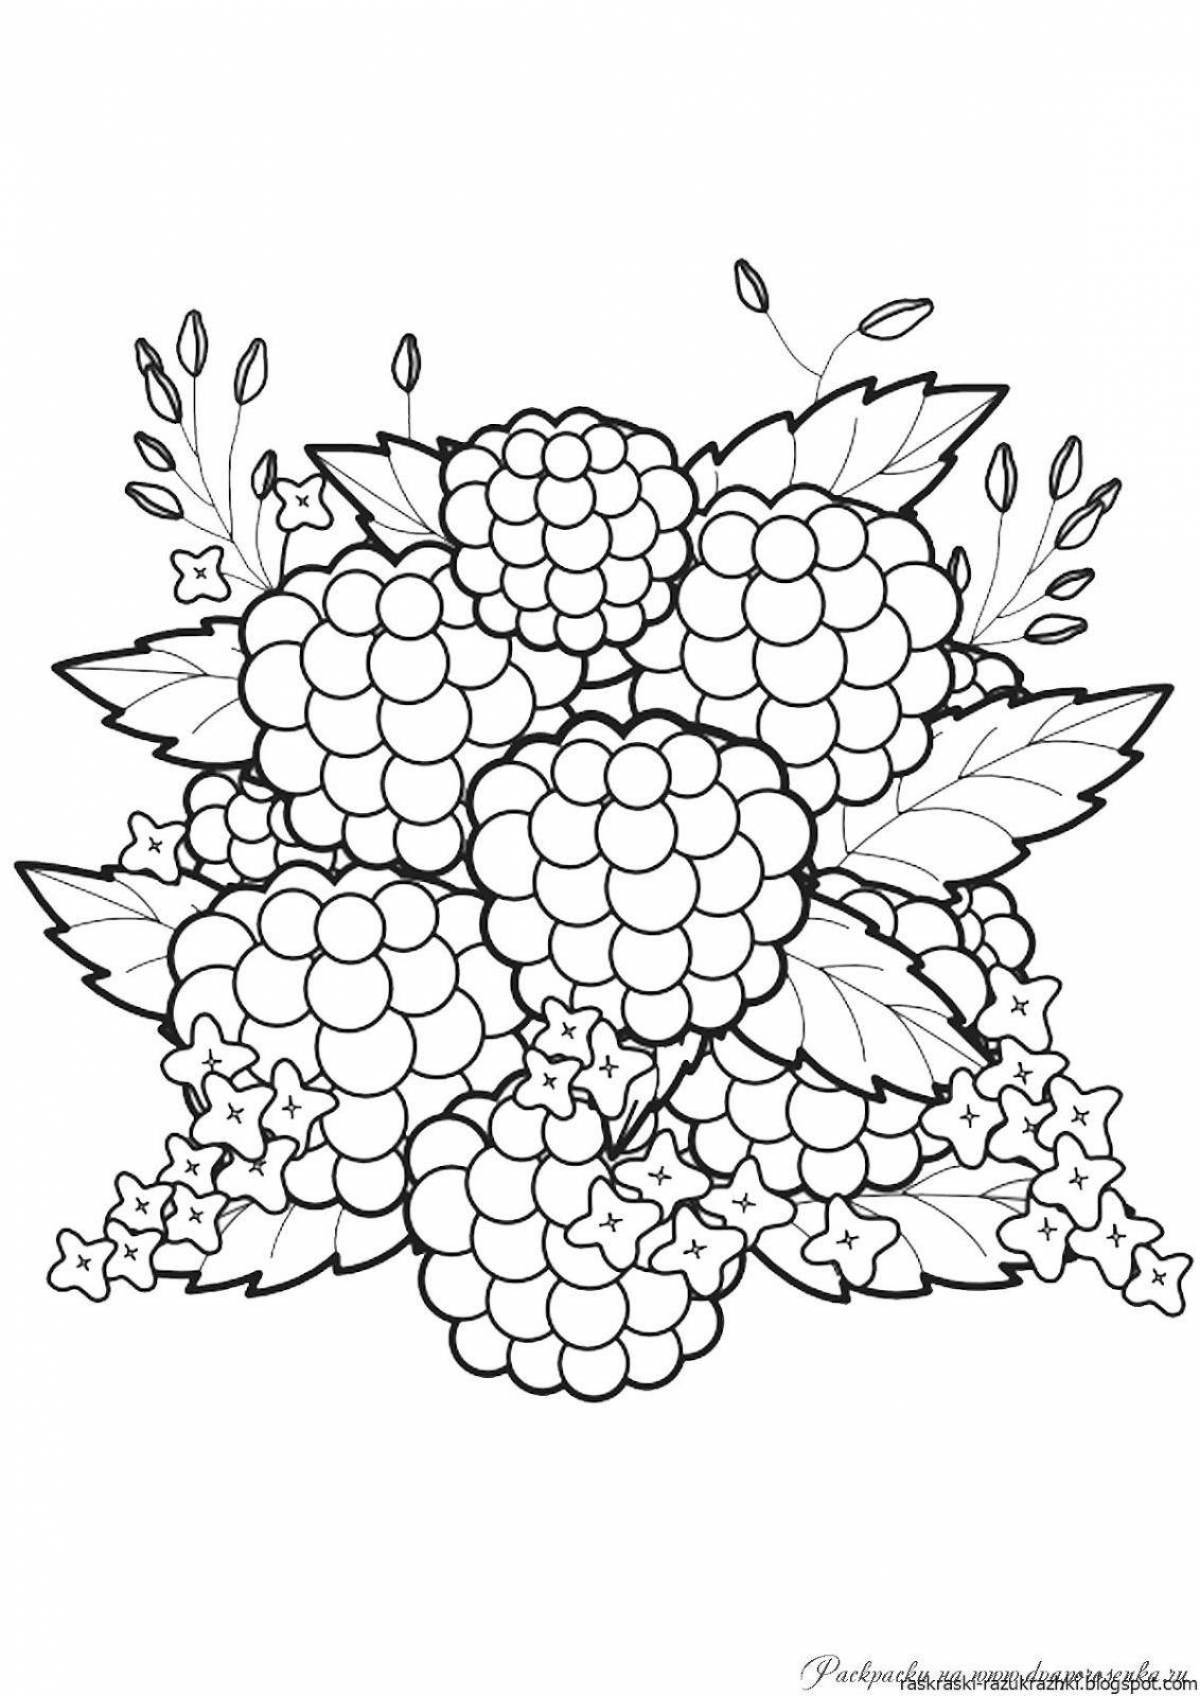 Playful blackberry coloring page for kids